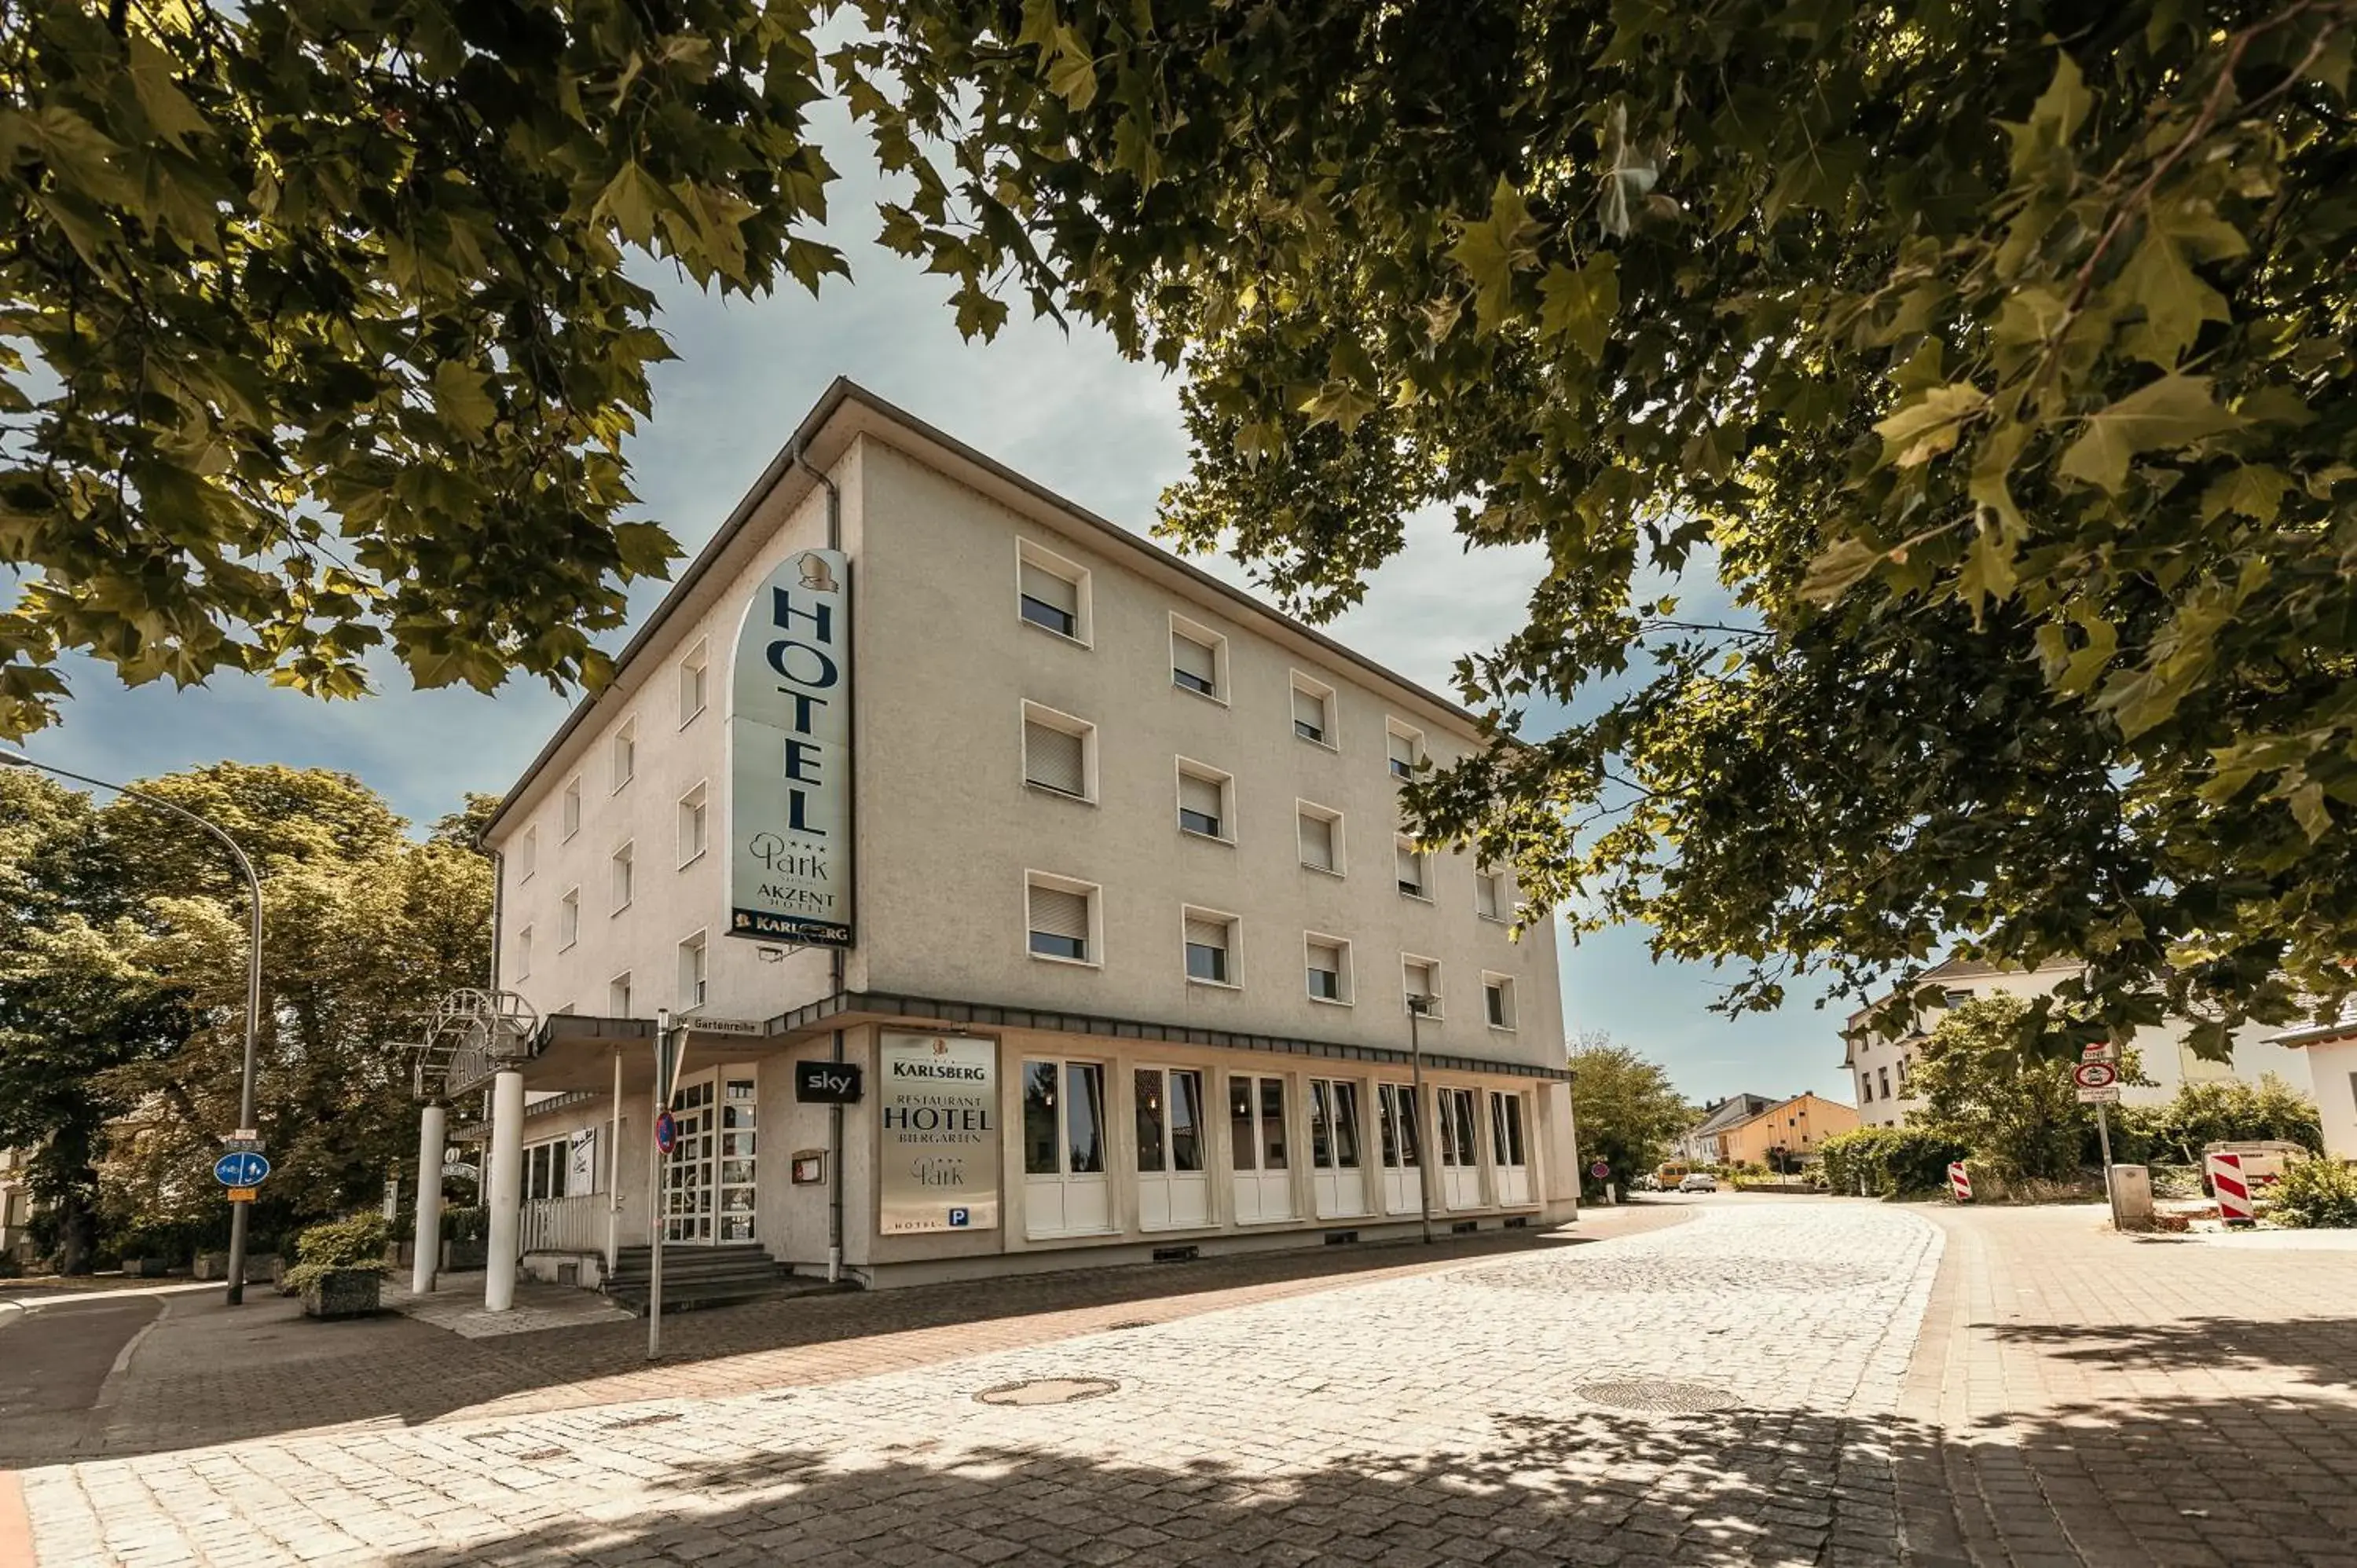 Property Building in Otto's Parkhotel Saarlouis